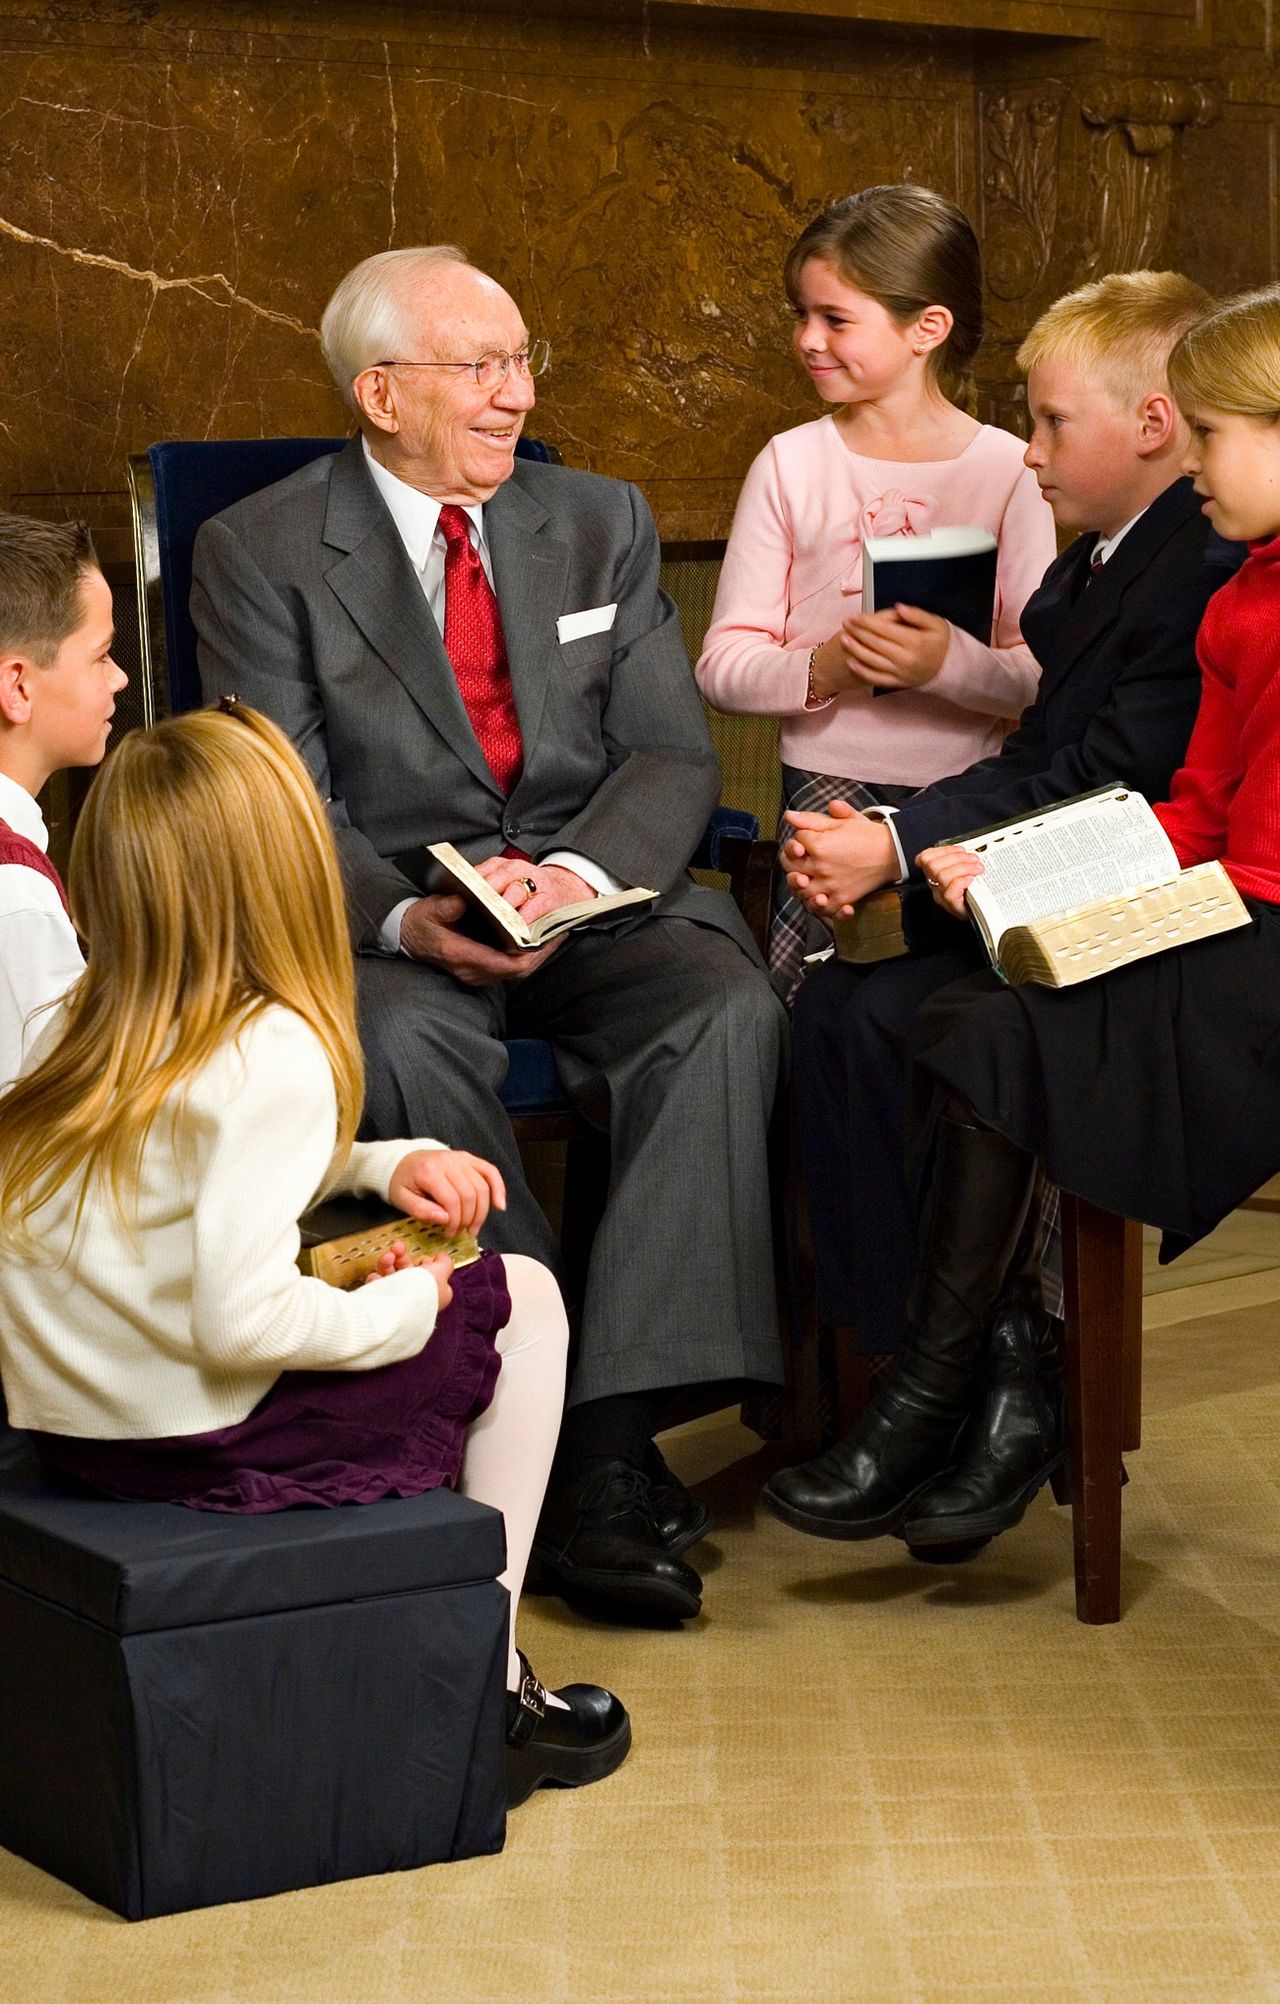 President Gordon B. Hinckley with a group of children.